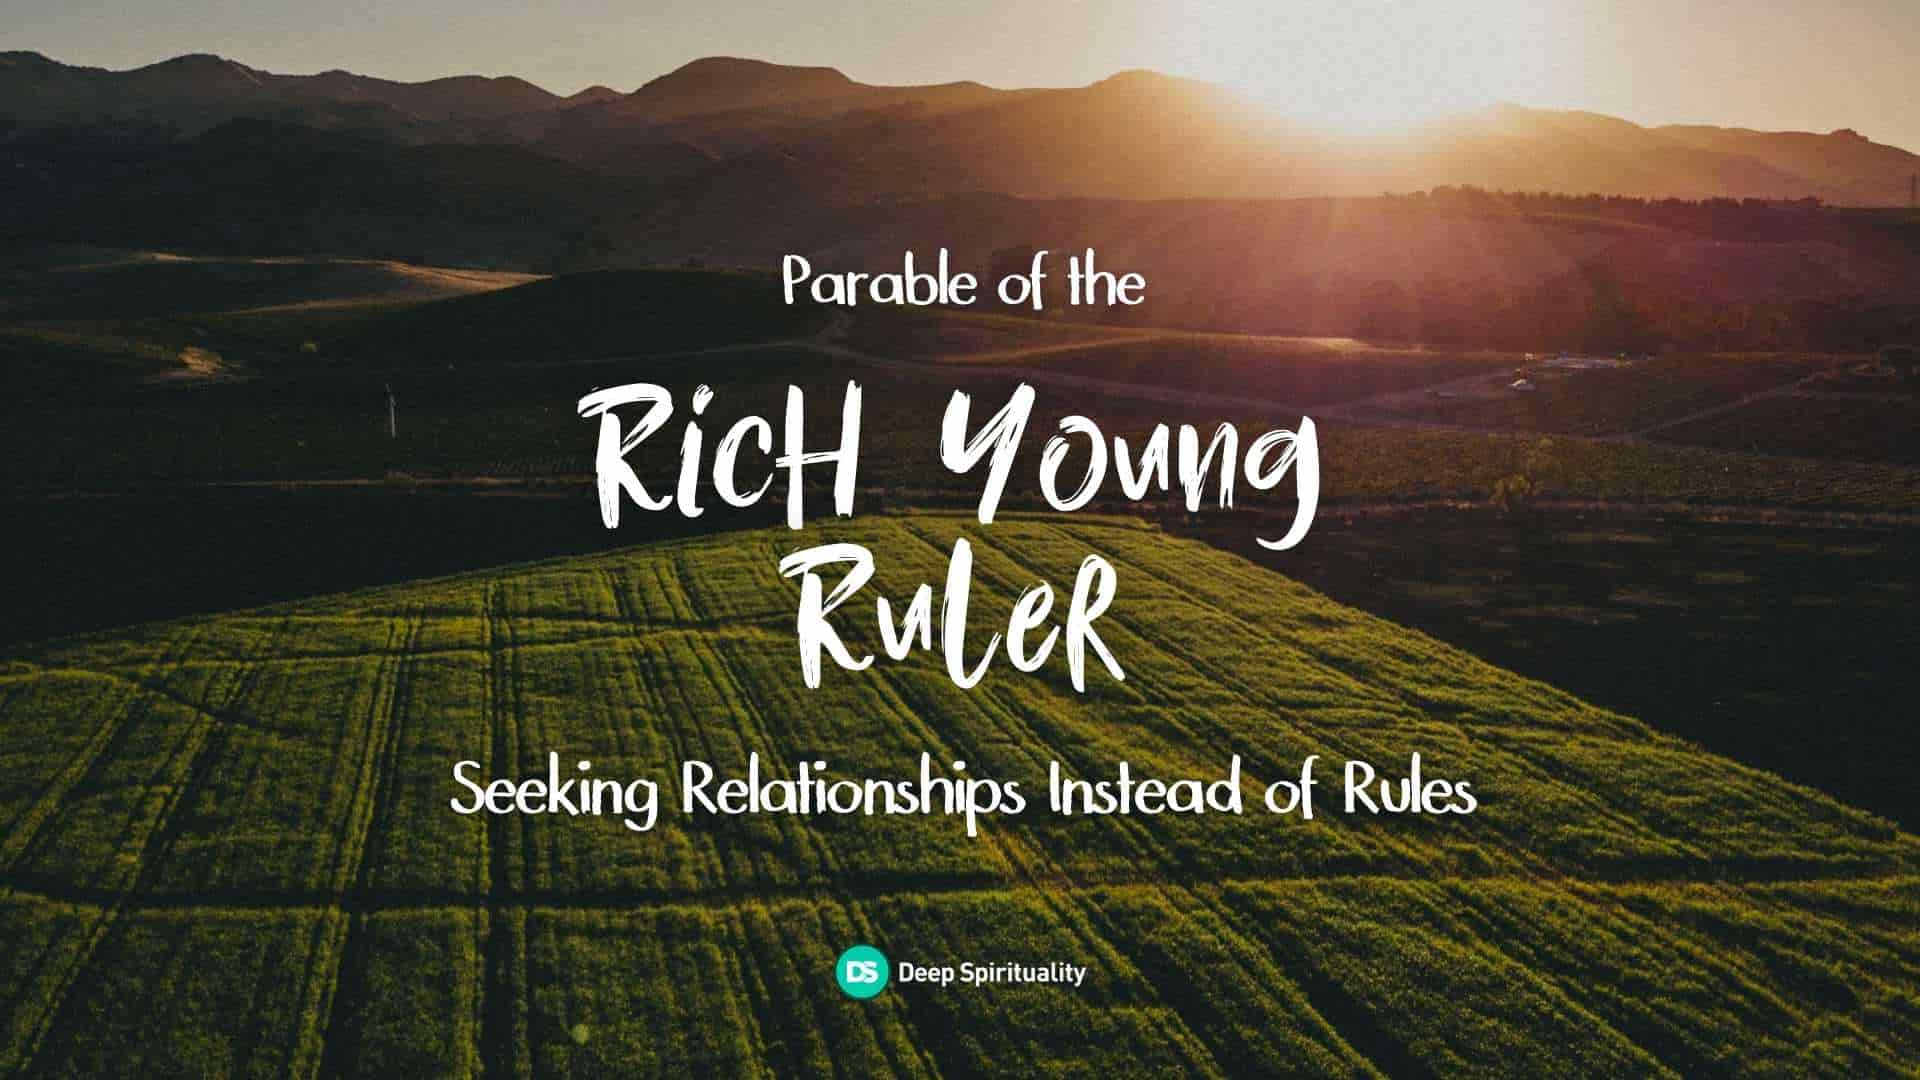 The Rich Young Ruler: How to Stop Seeing Rules and Start Seeing Relationship 5